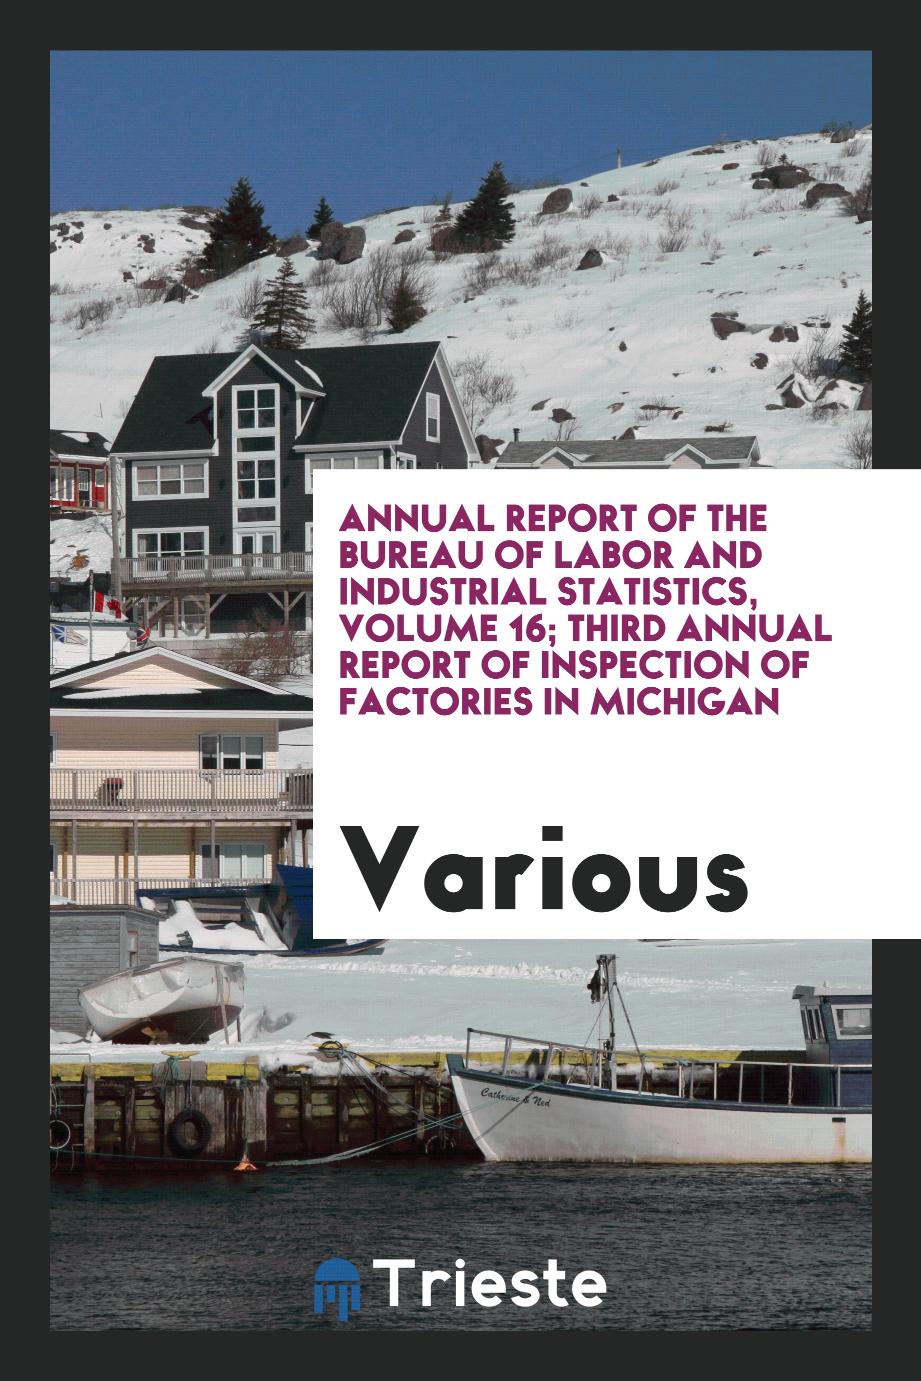 Annual Report of the Bureau of Labor and Industrial Statistics, Volume 16; Third Annual Report of Inspection of Factories in Michigan